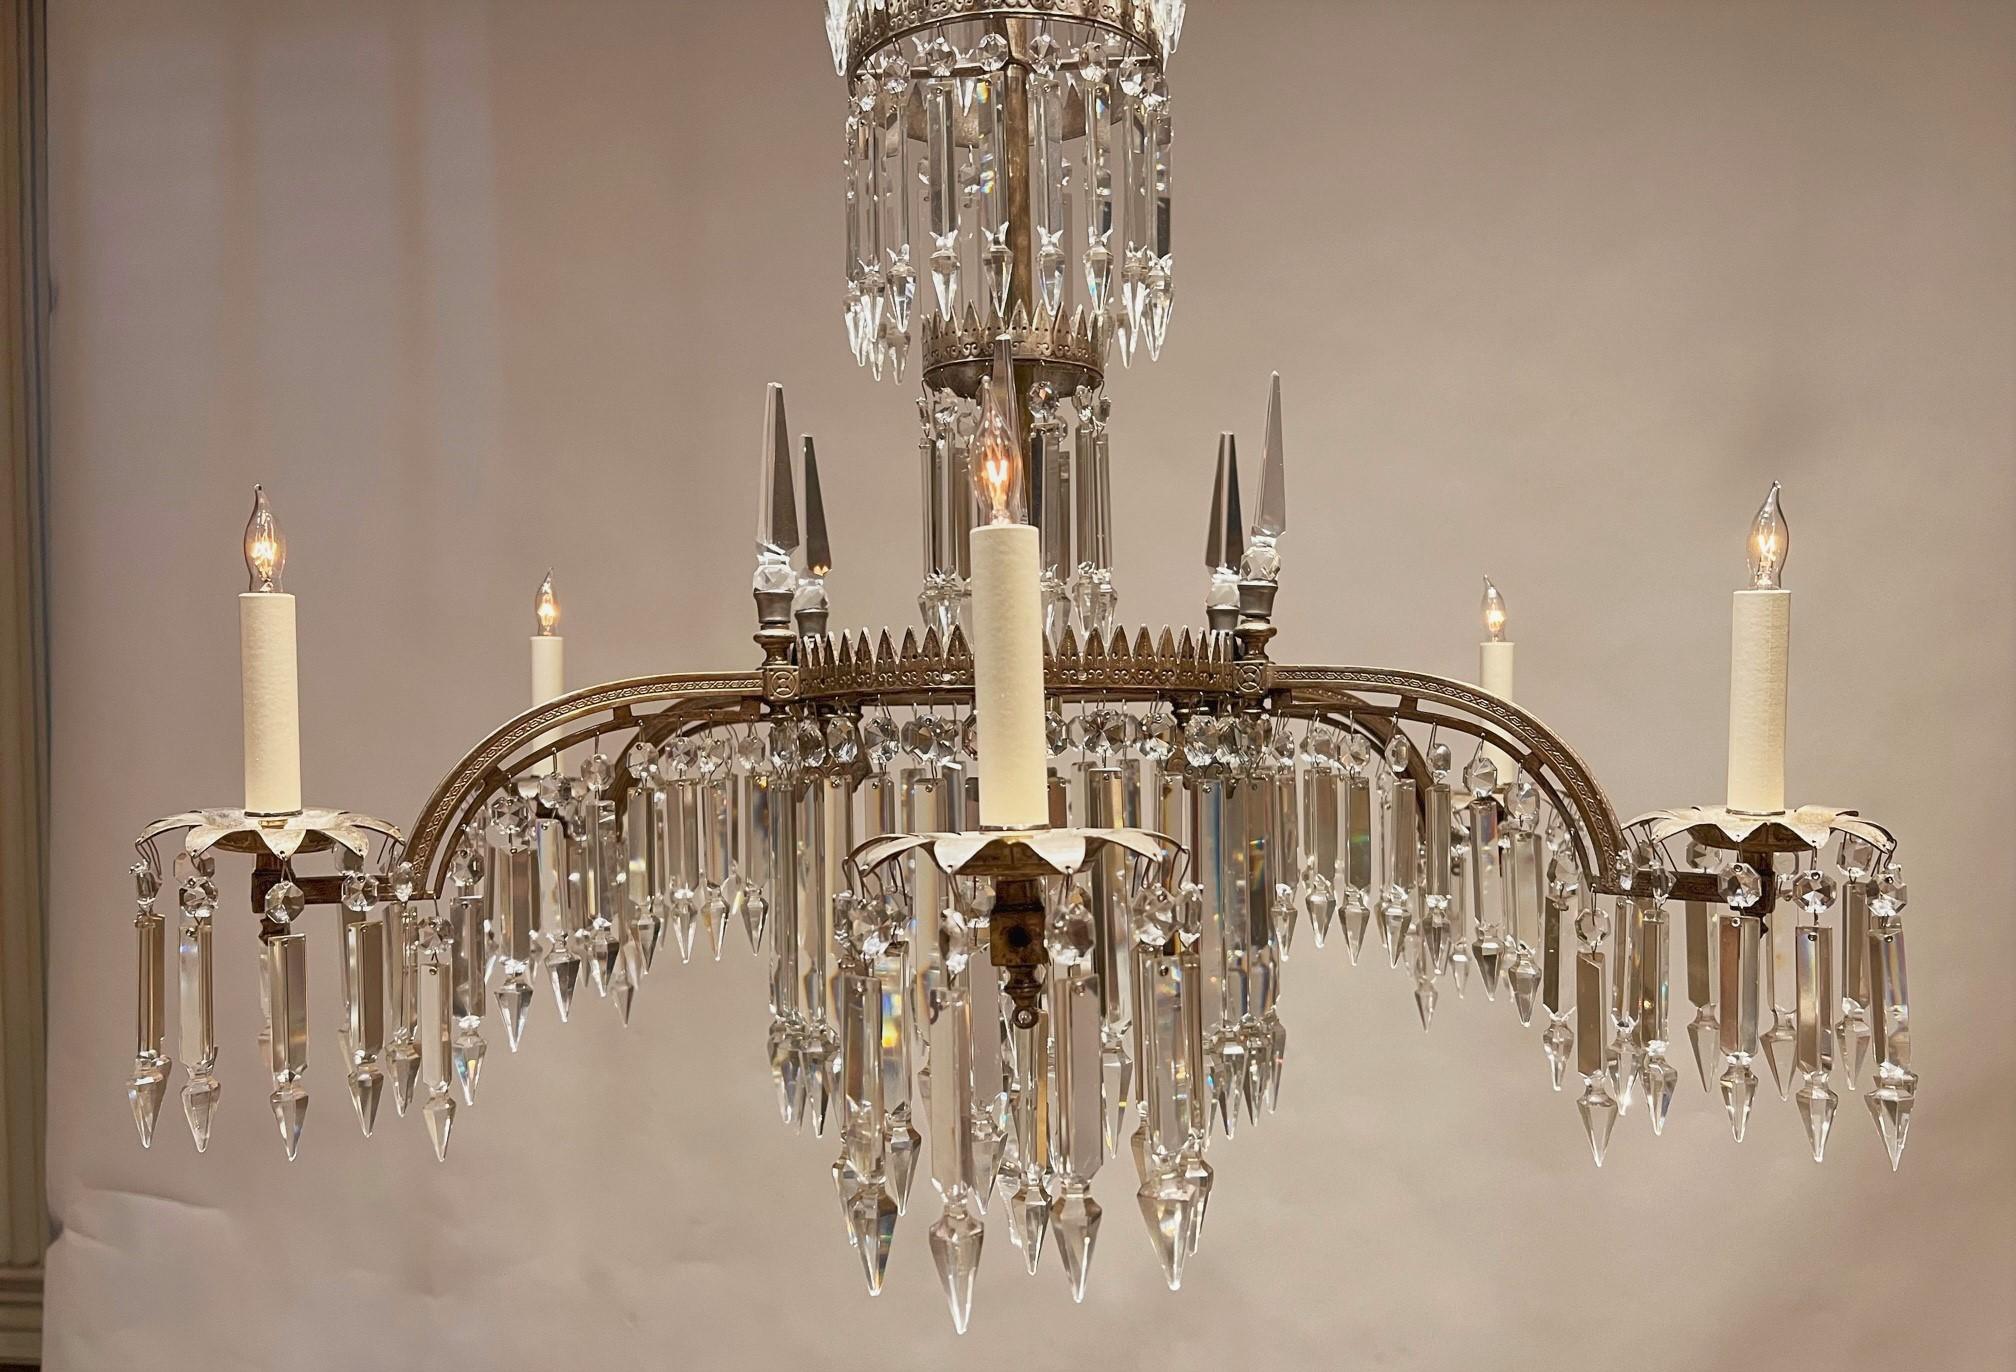 6-Light Silvered Bronze & Crystal Electrified Gasolier, America, Circa:1850 For Sale 2